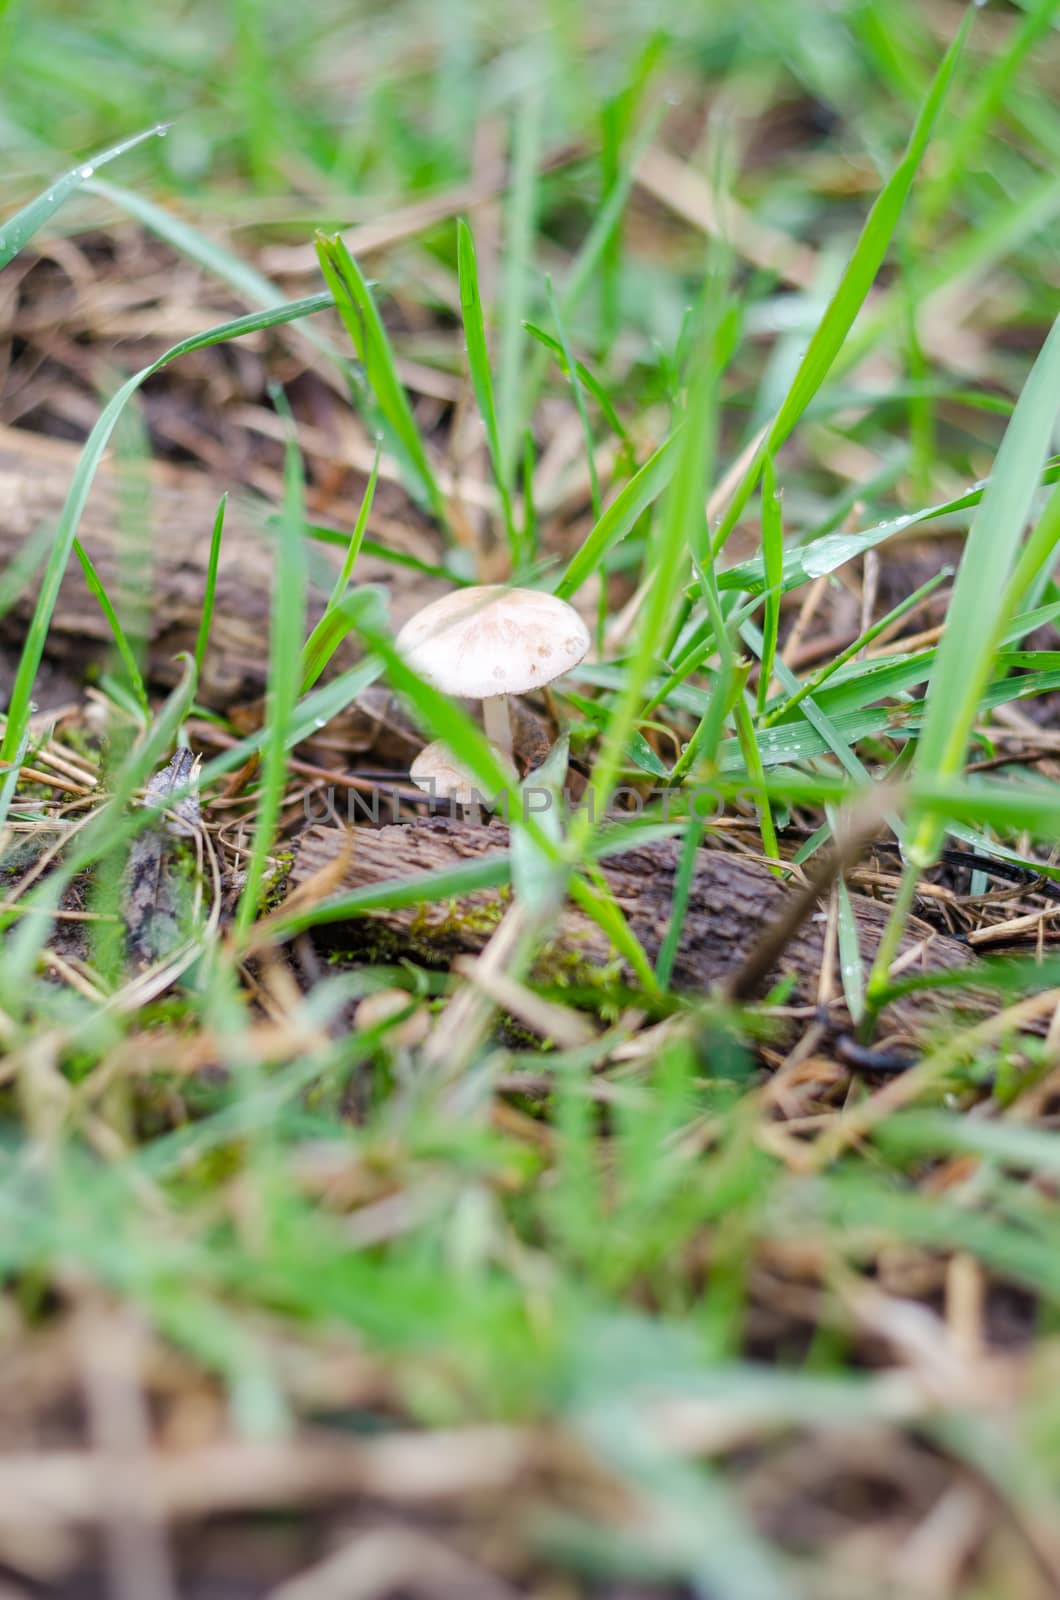 Mushroom in the green grass in the spring after the rain.